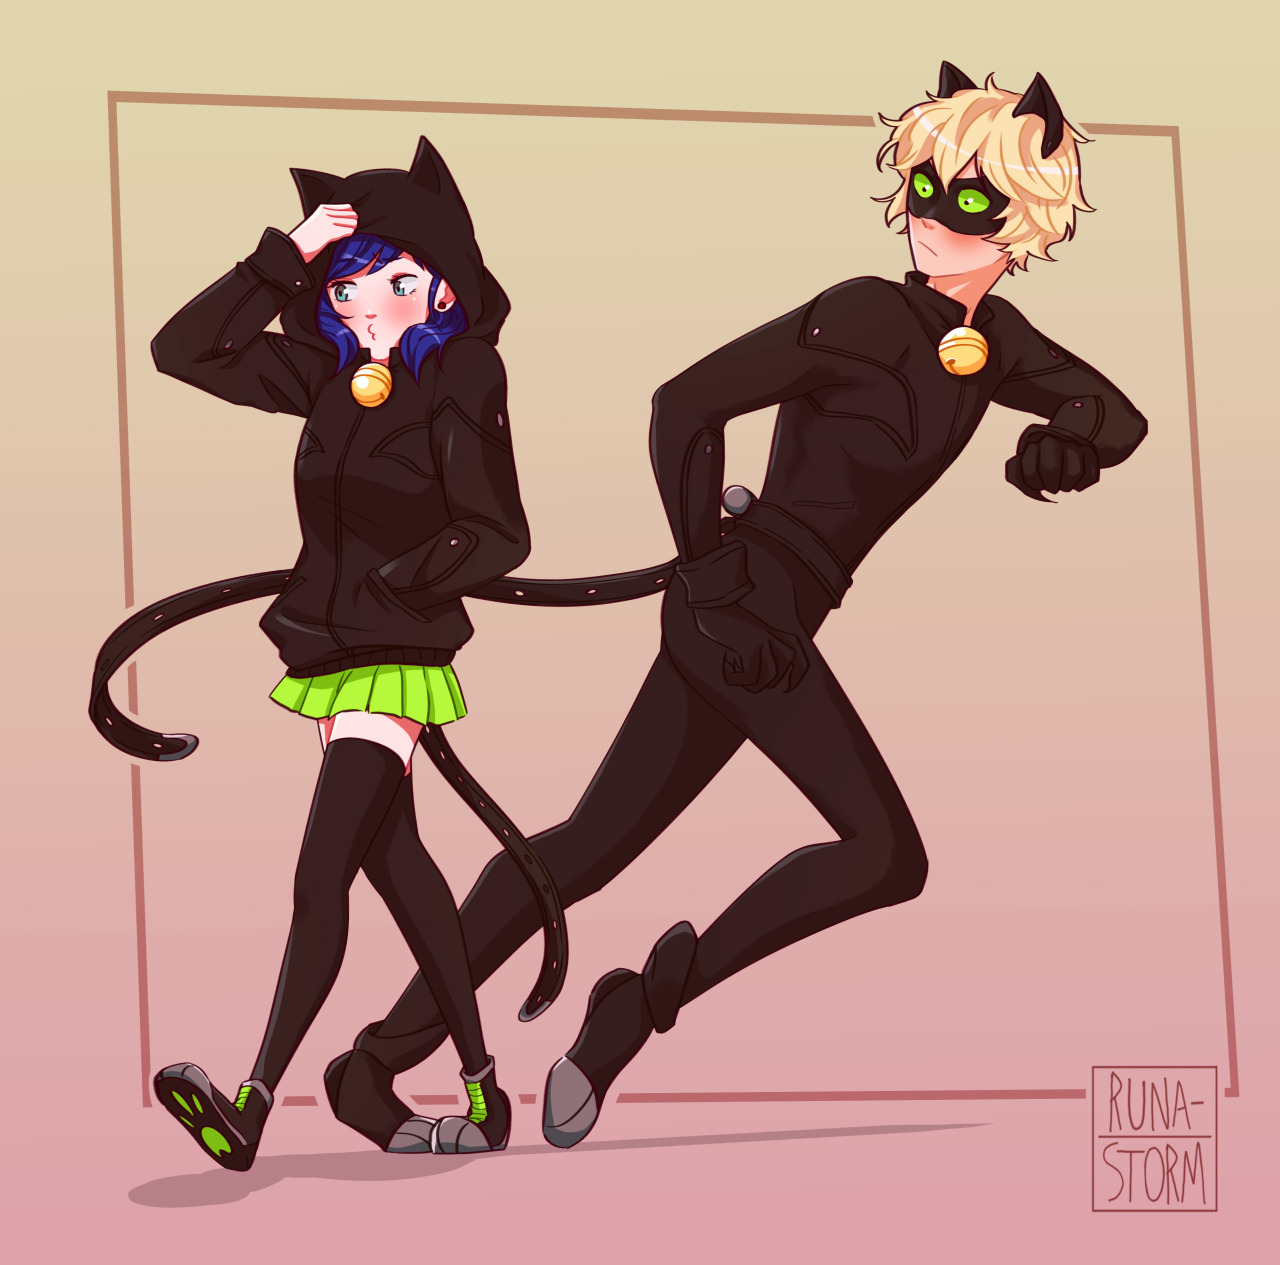 runa-storm:  “Play it cool, Marinette, play it cool! He probably didn’t even